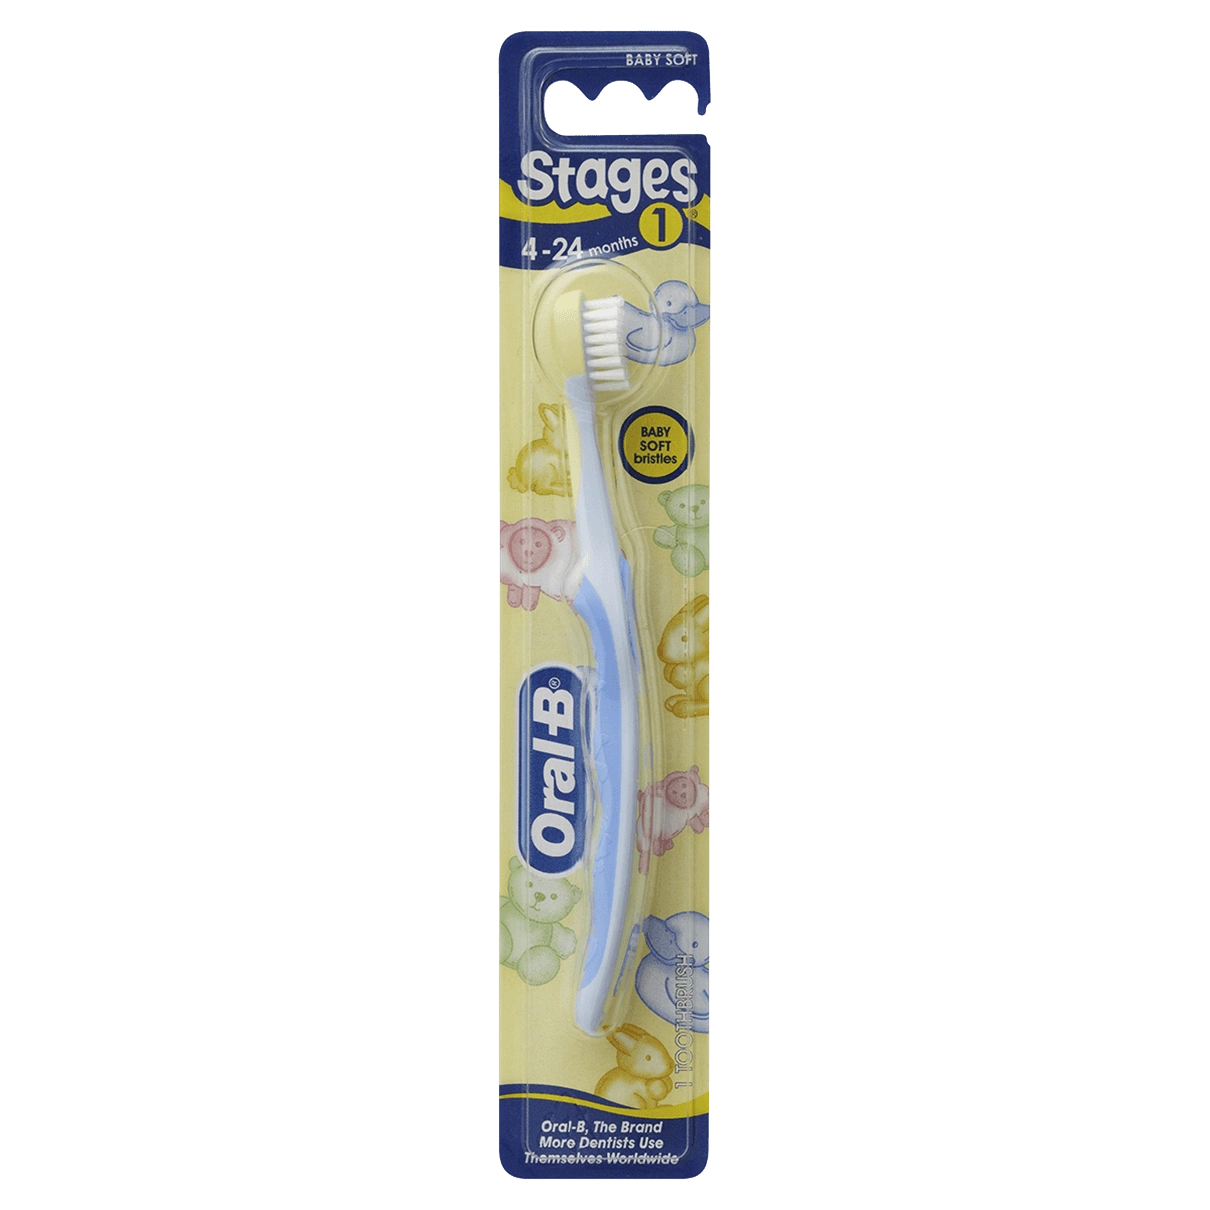 Oral B Stages 1 4-24 Months Toothbrush